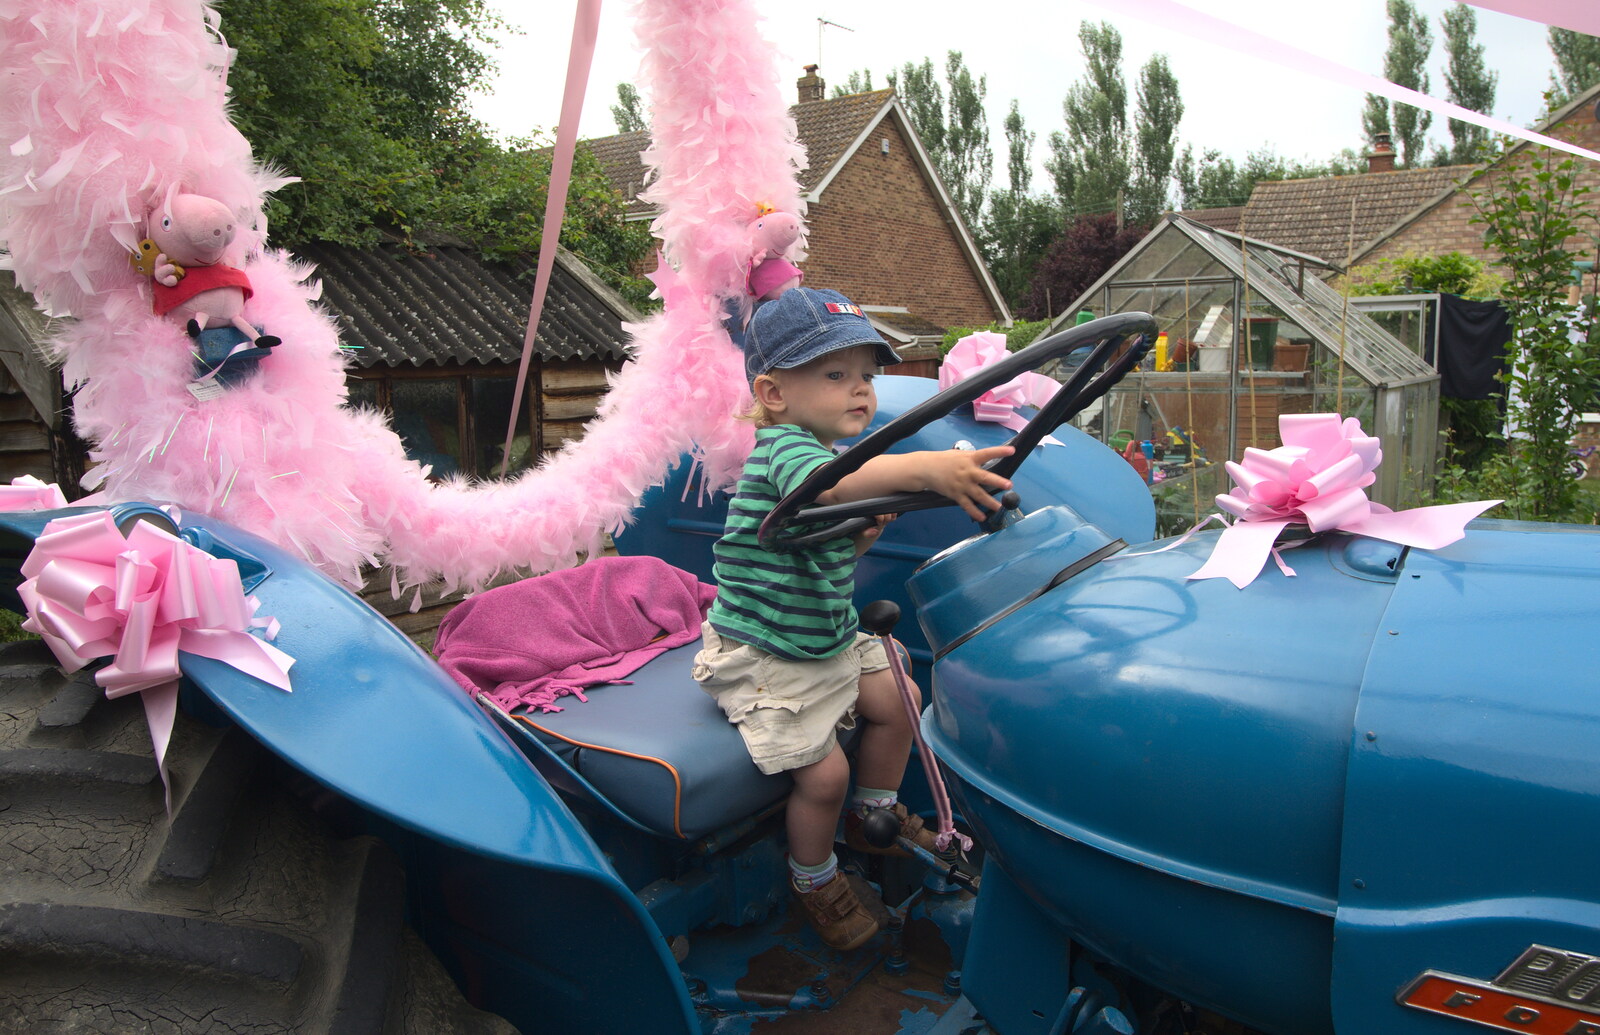 Harry on a pink tractor from The BSCC at Pulham Crown, and Grandad with a Grinder, Brome, Suffolk - 11th July 2013